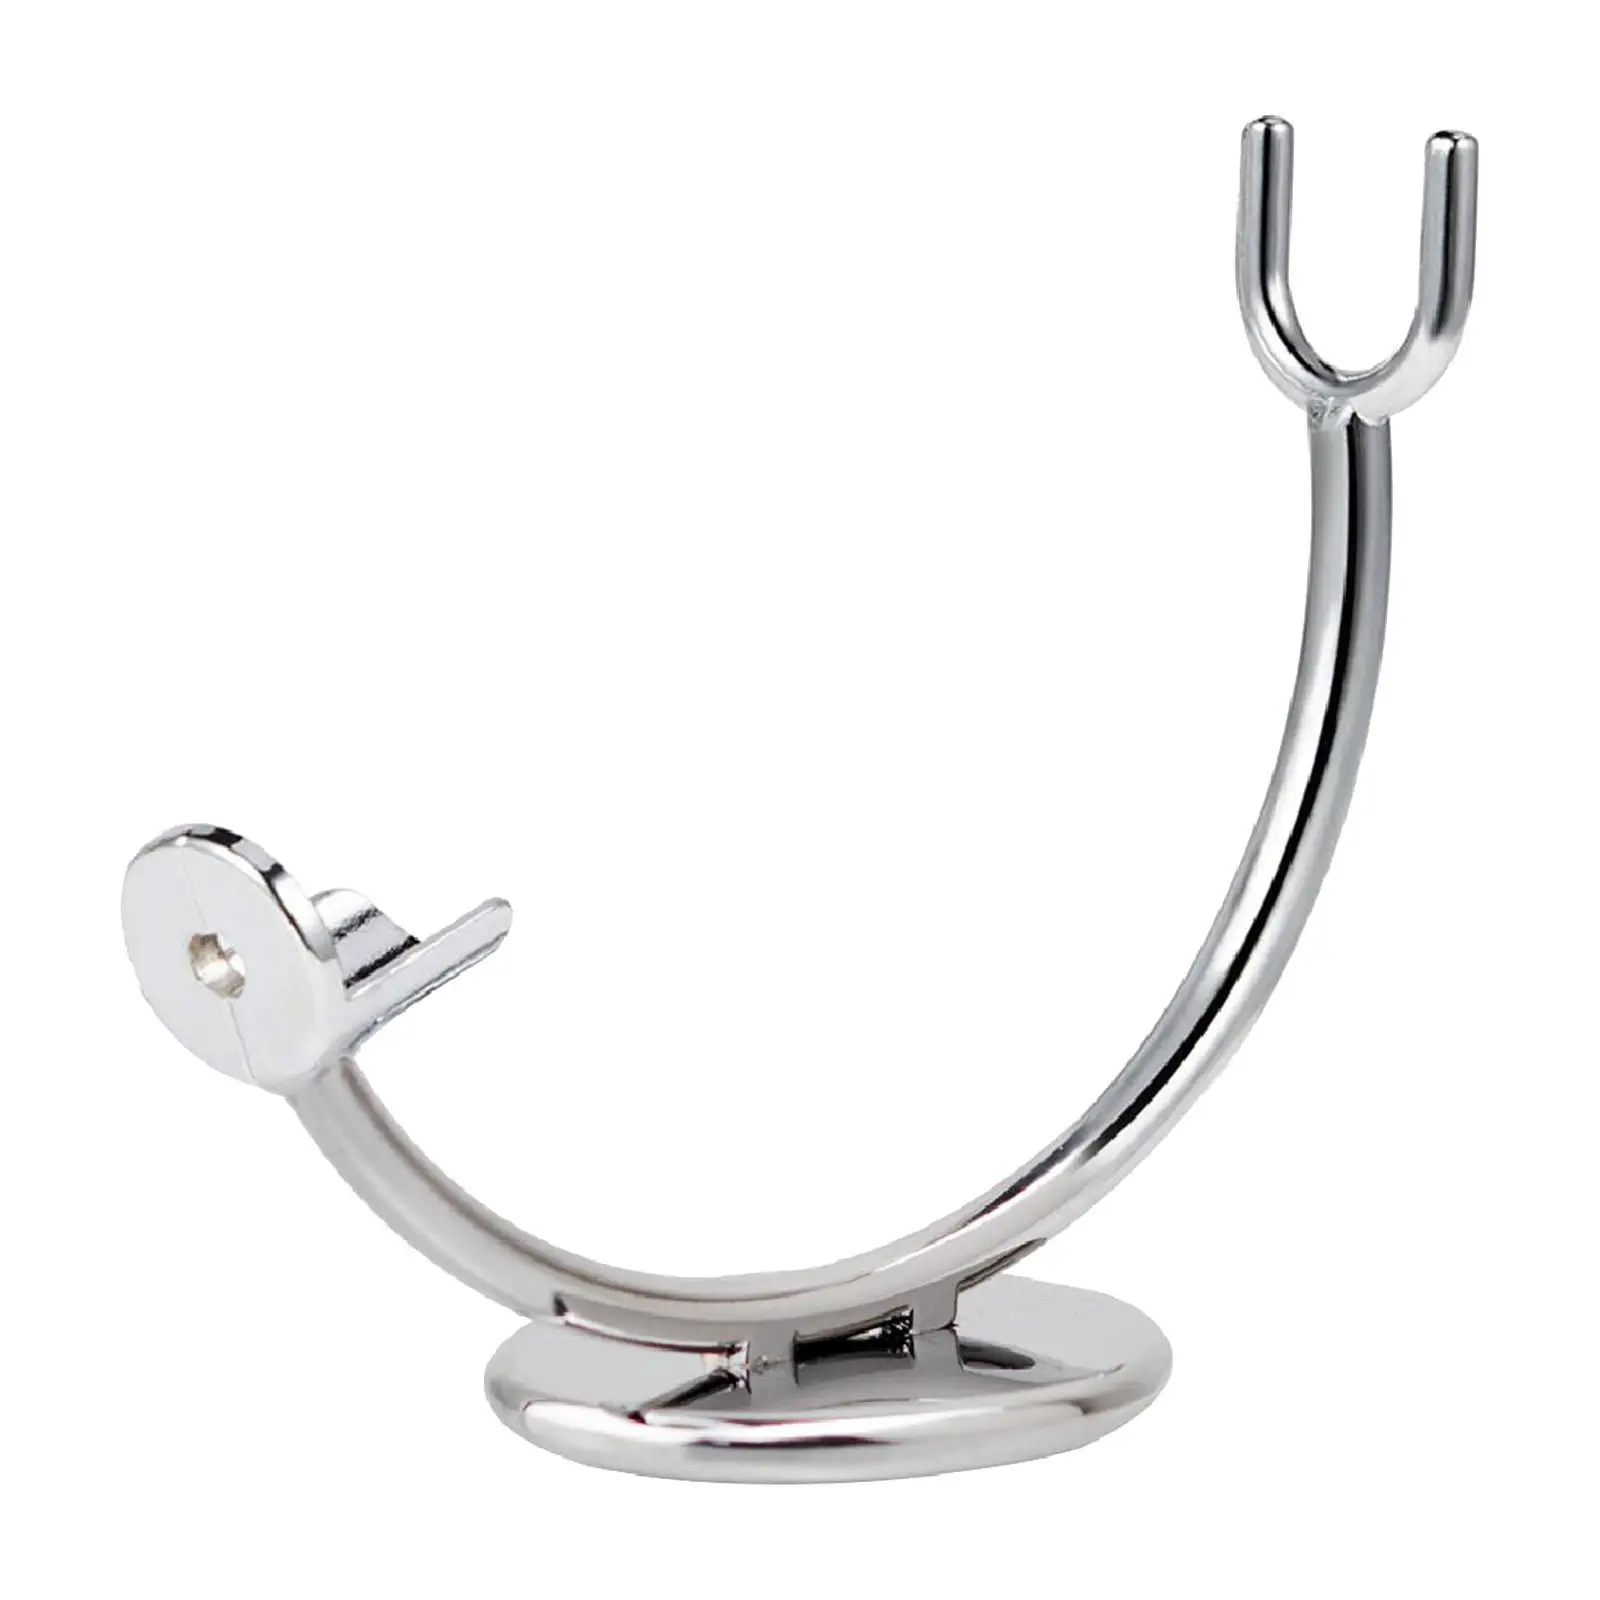 Straight Razor Stand Curved Stand Shaving Stand for Wet Shaving Man Height 8.7cm/3.4inch Anti Skid Base for Stability Accessory